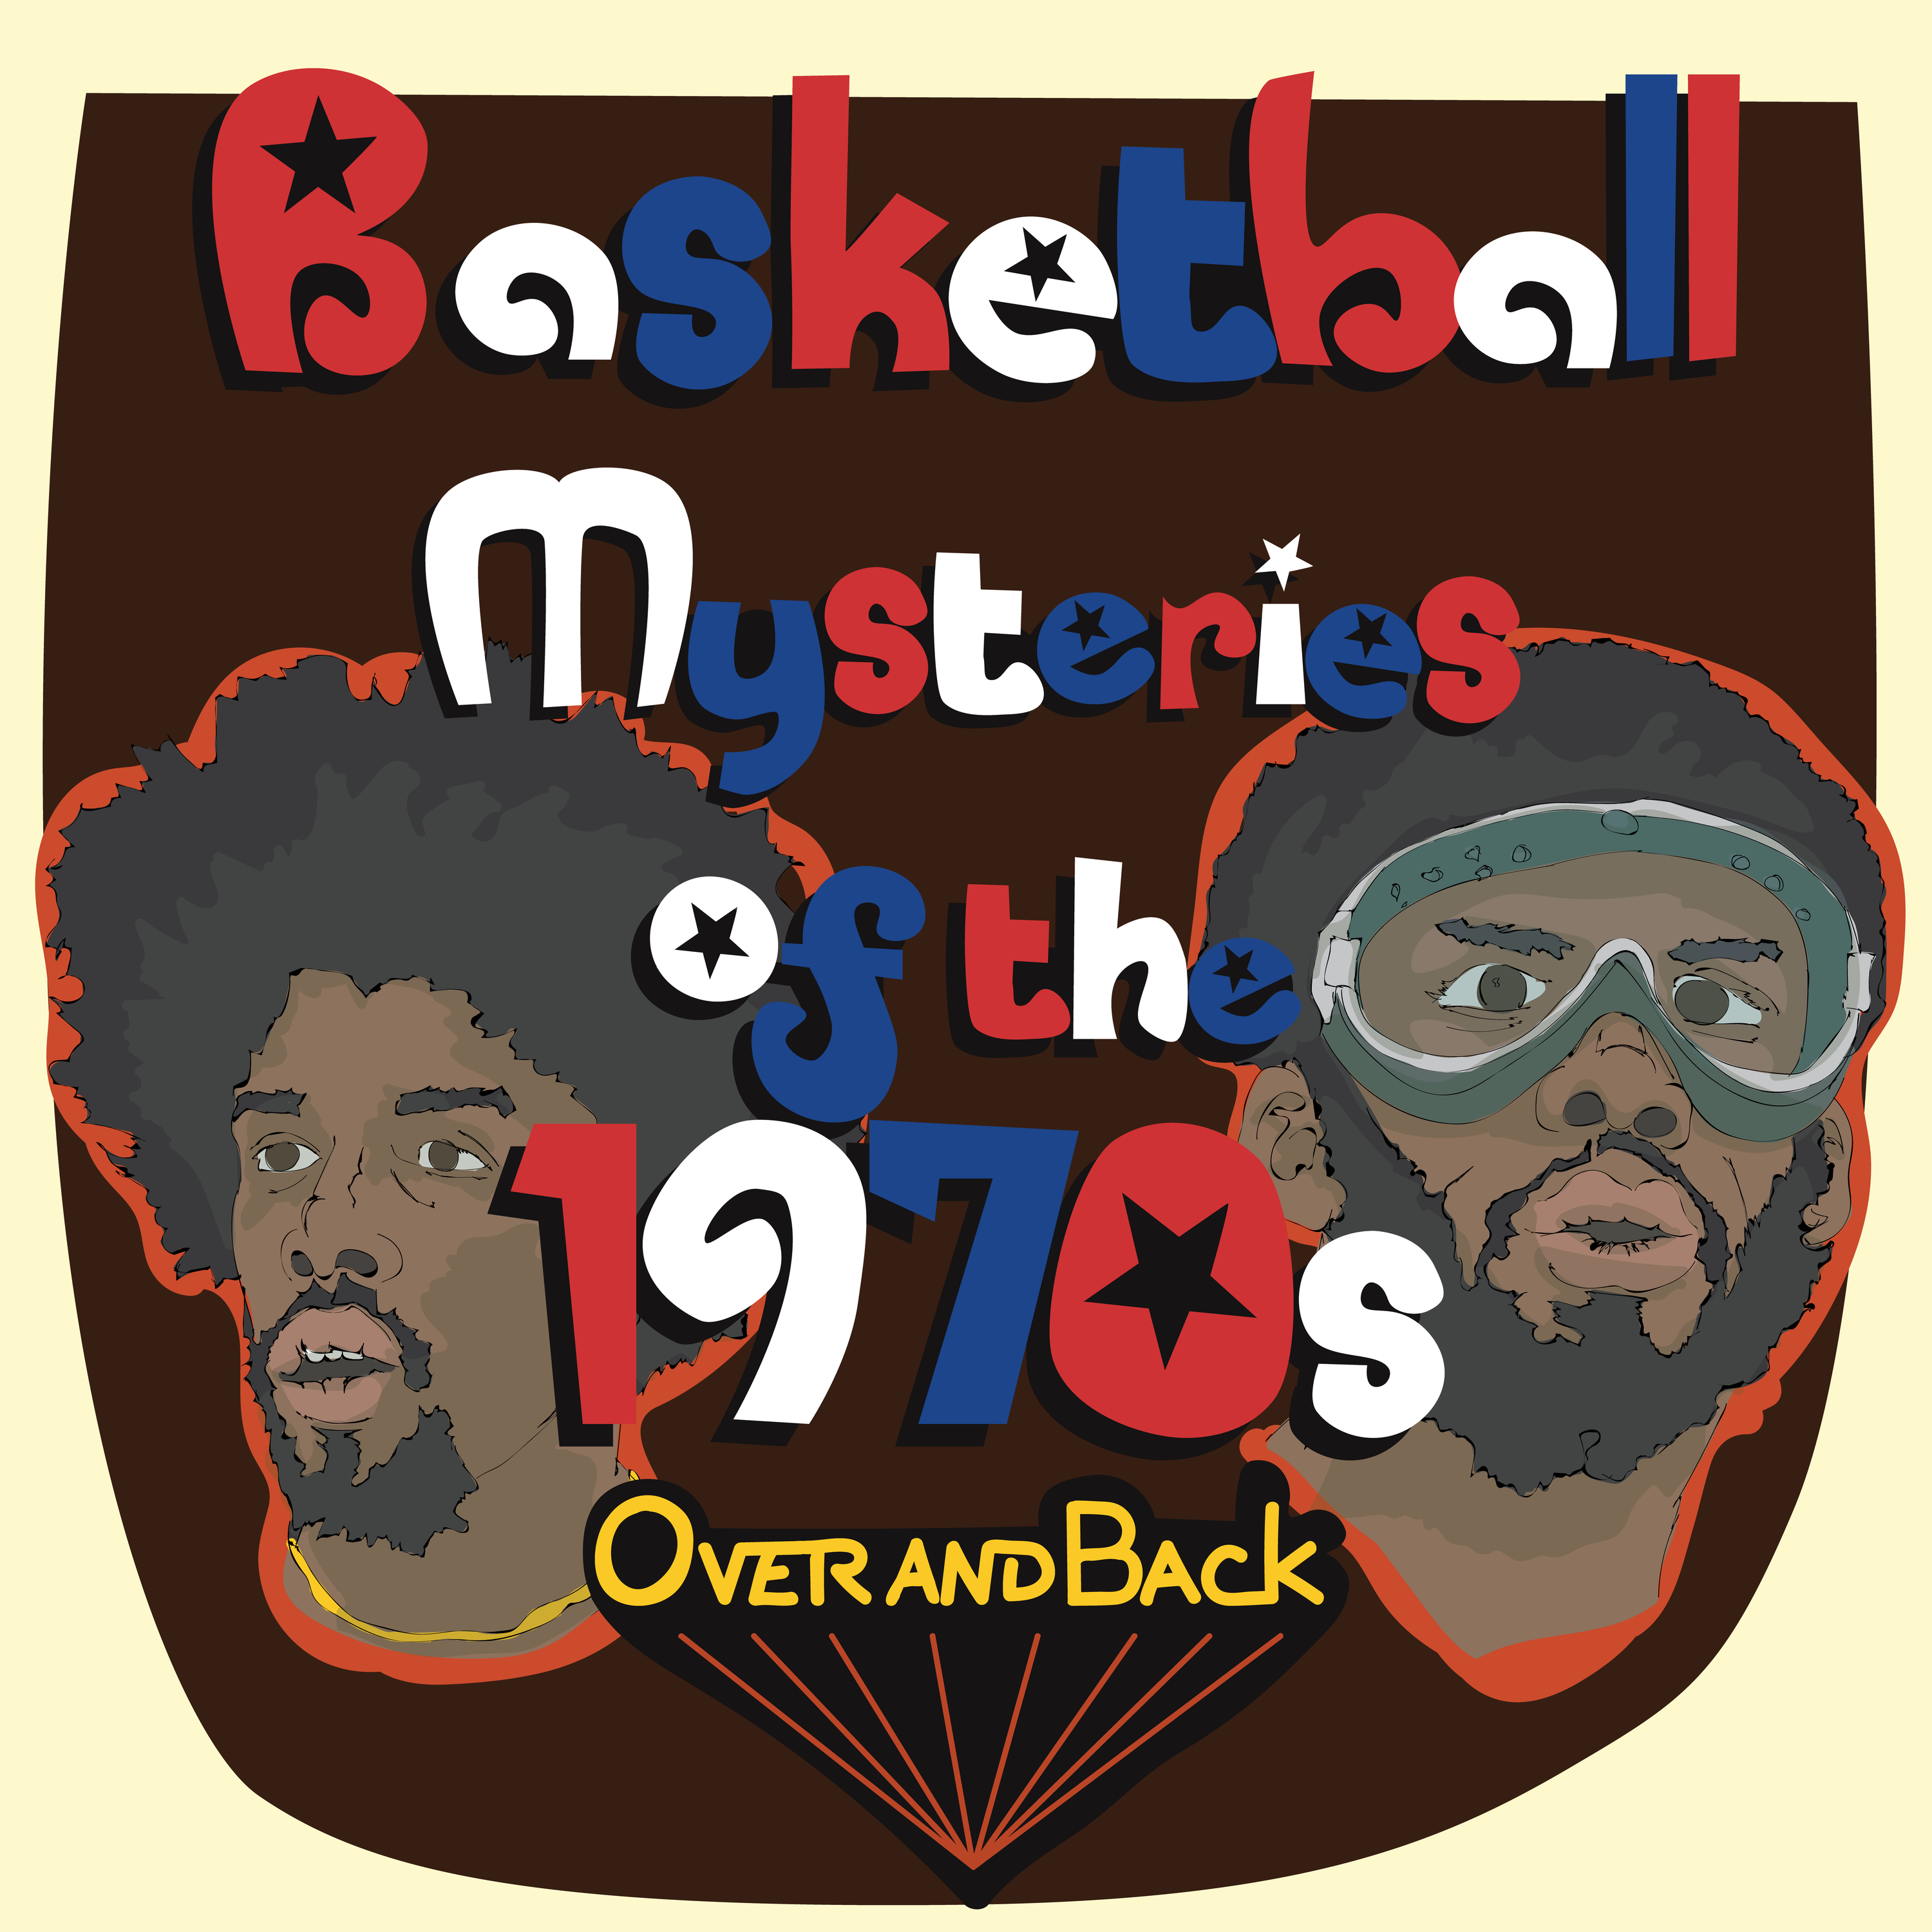 Who were the most fashionable 1970s players? (Basketball Mysteries of the 1970s #31)